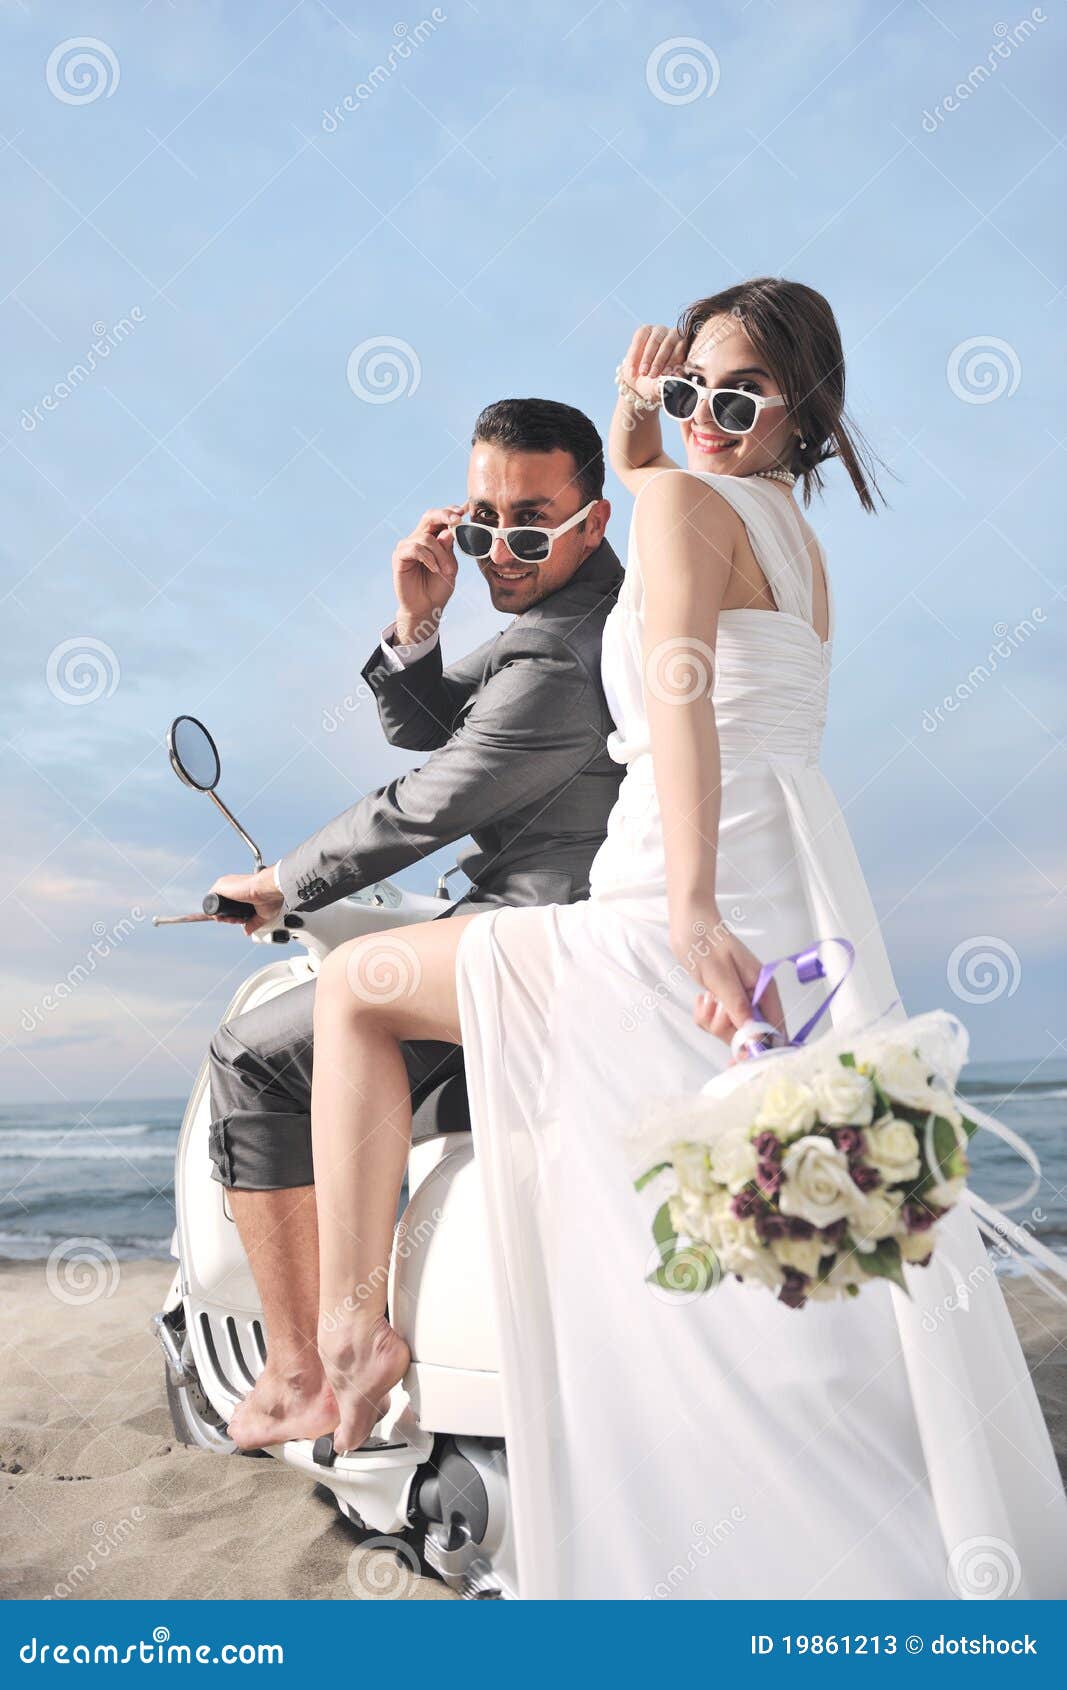 124 Just Married Couple Ride White Pho